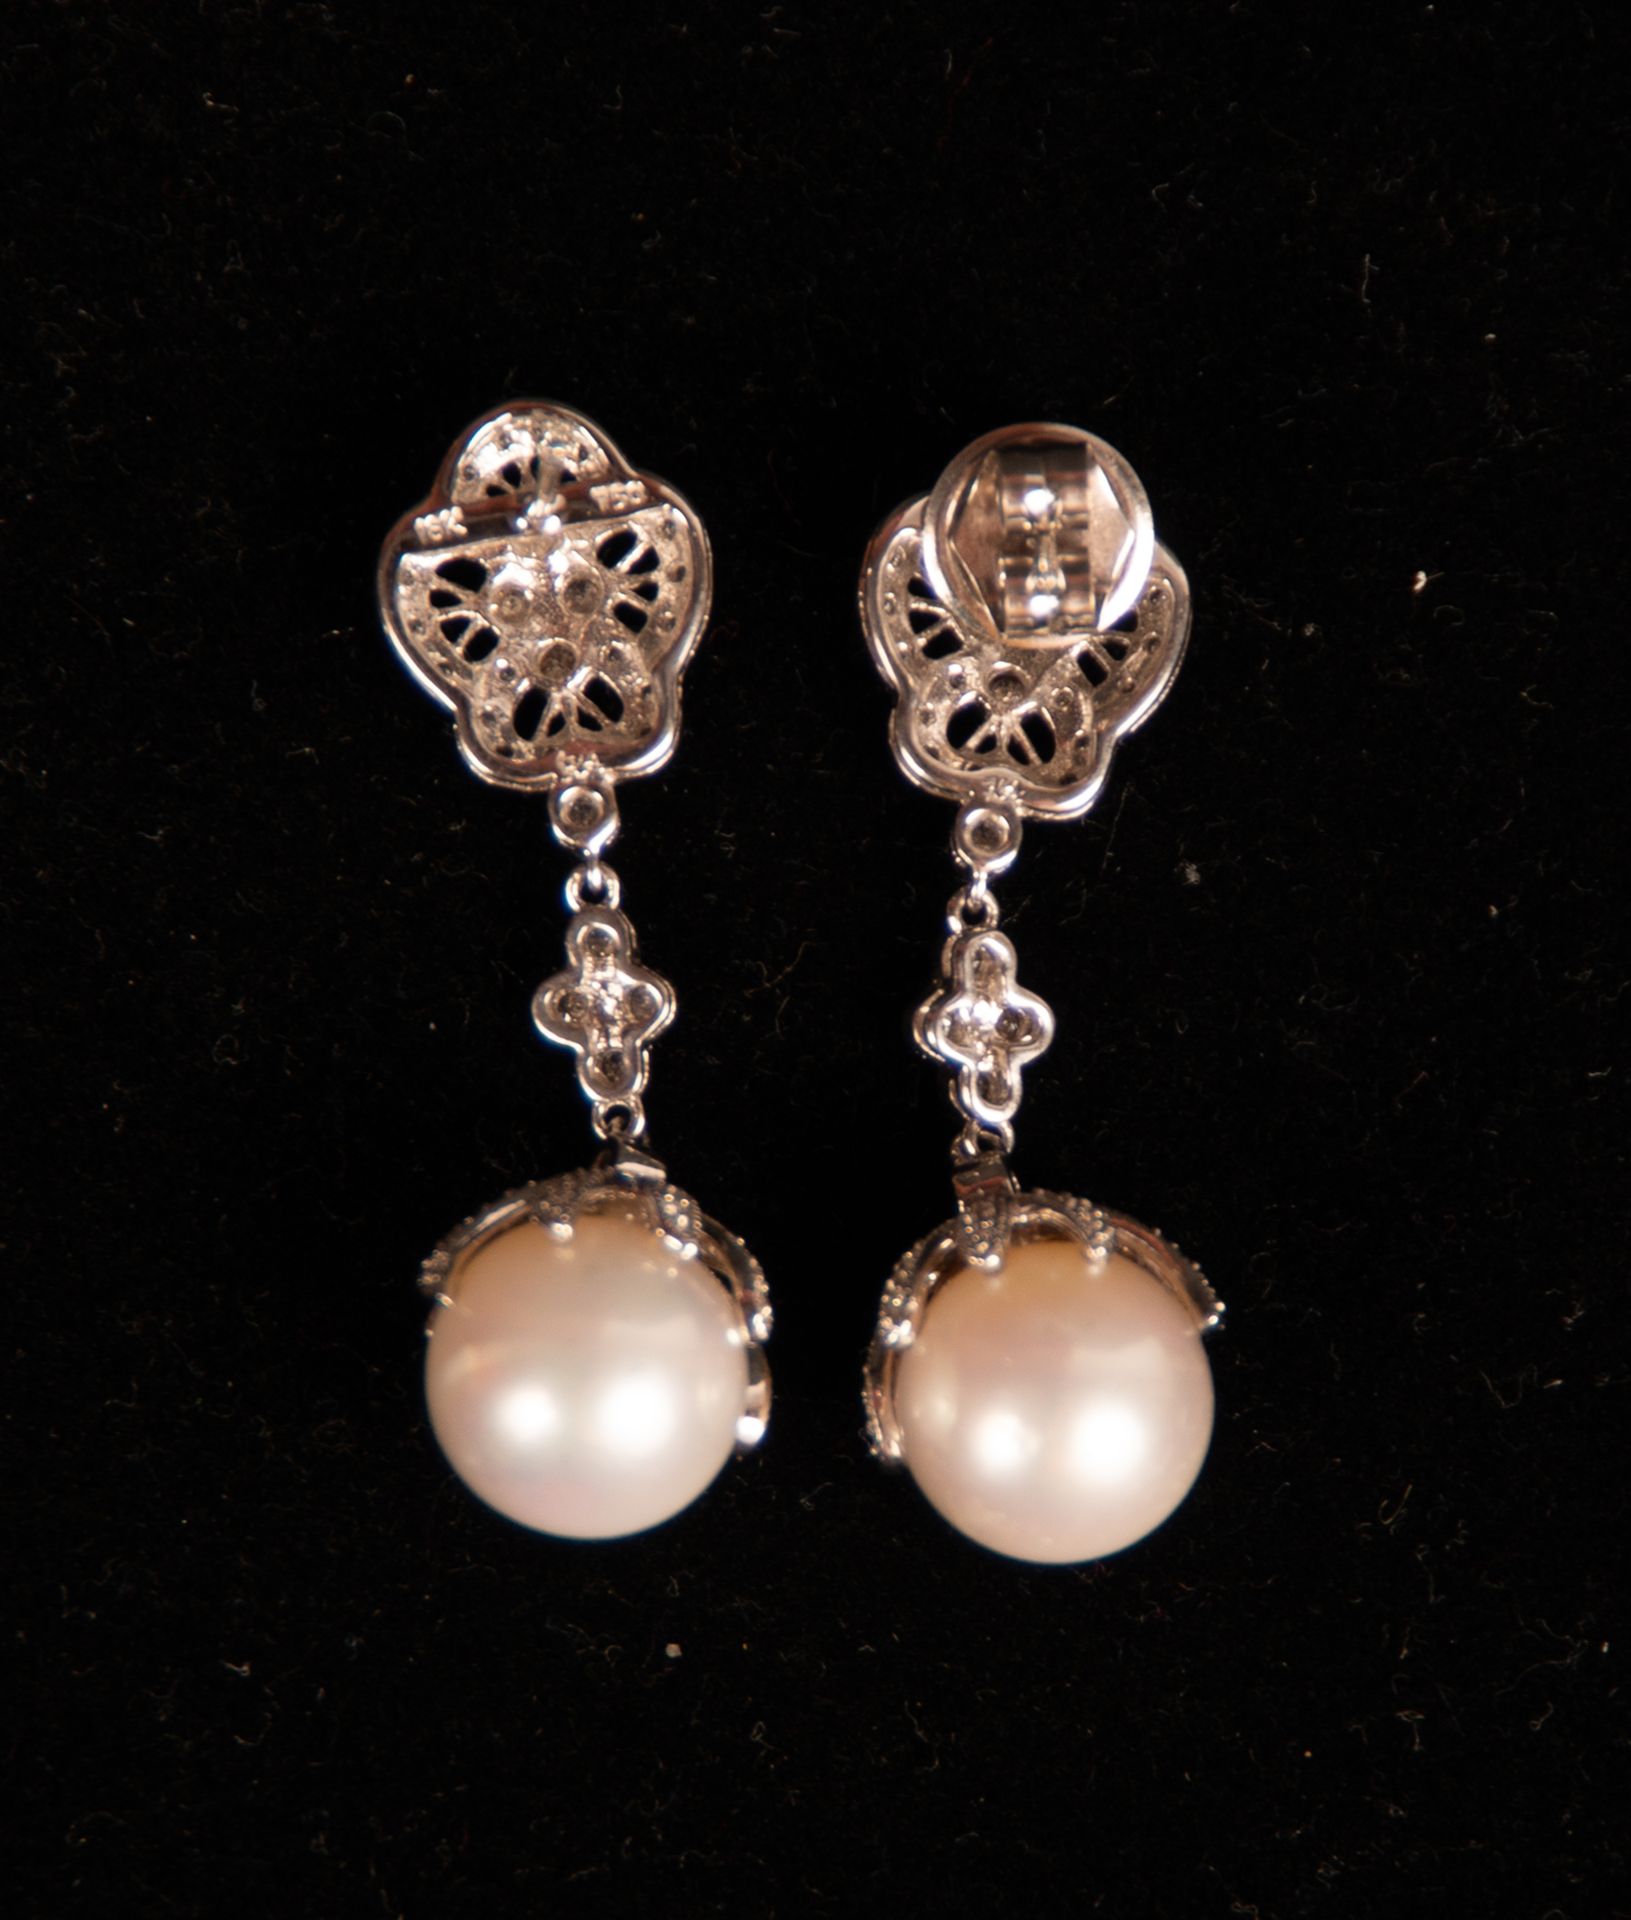 Pair of Clover-shaped Earrings with Crimped Pearls - Image 4 of 5